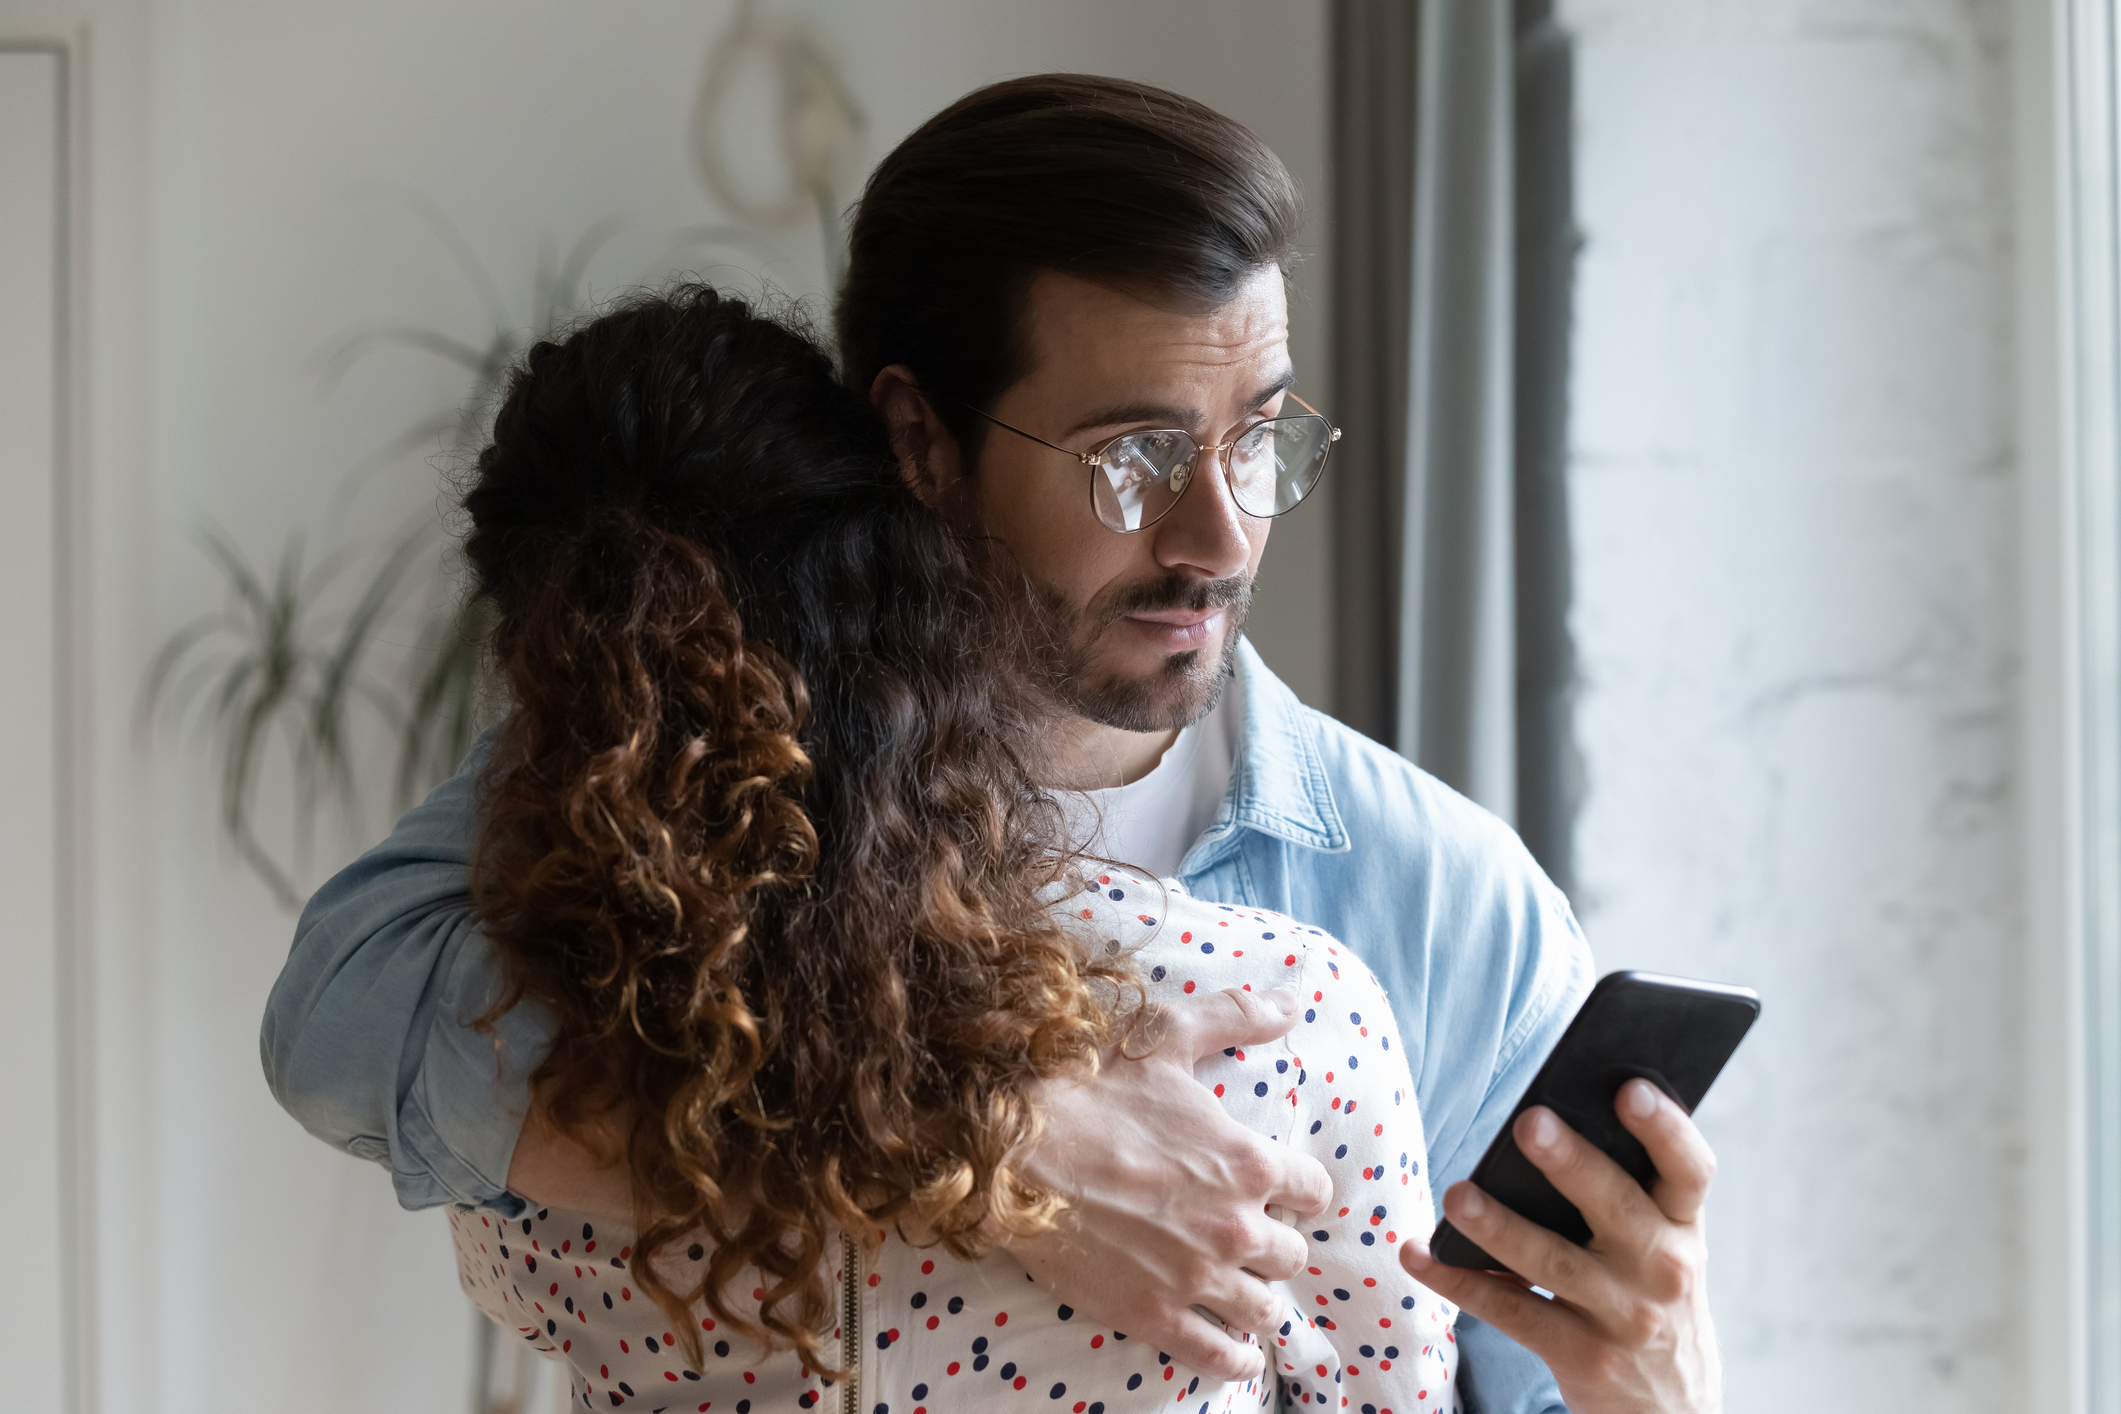 Man with glasses hugs a woman, both looking at his phone with concerned expressions